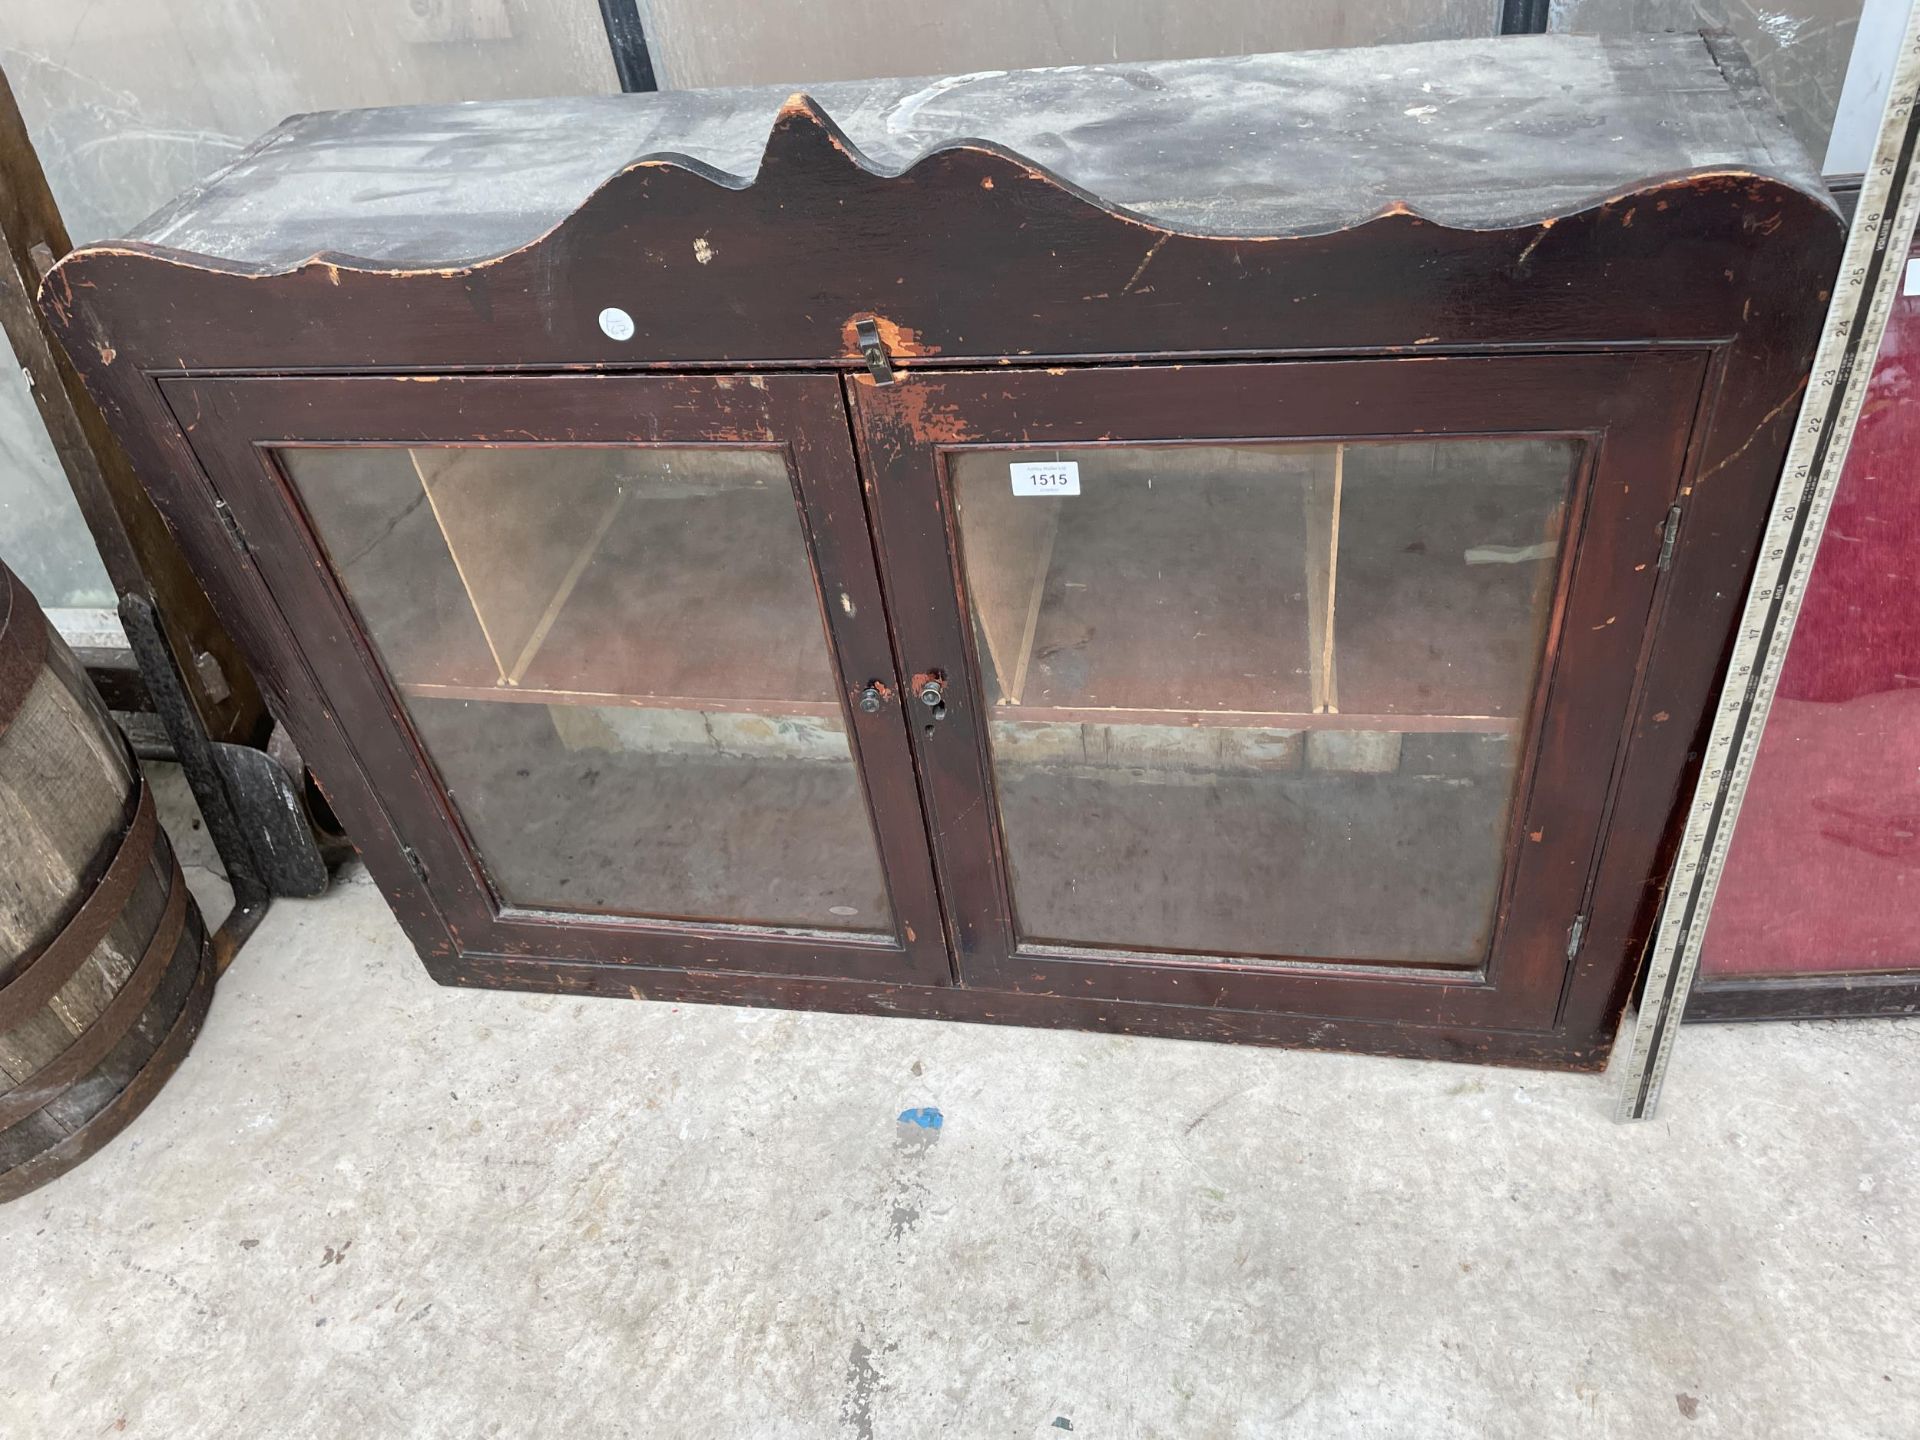 A VINTAGE MAHOGANY WALL UNIT WITH INTERNAL PIGEON HOLE SECTIONS AND GLASS DOORS